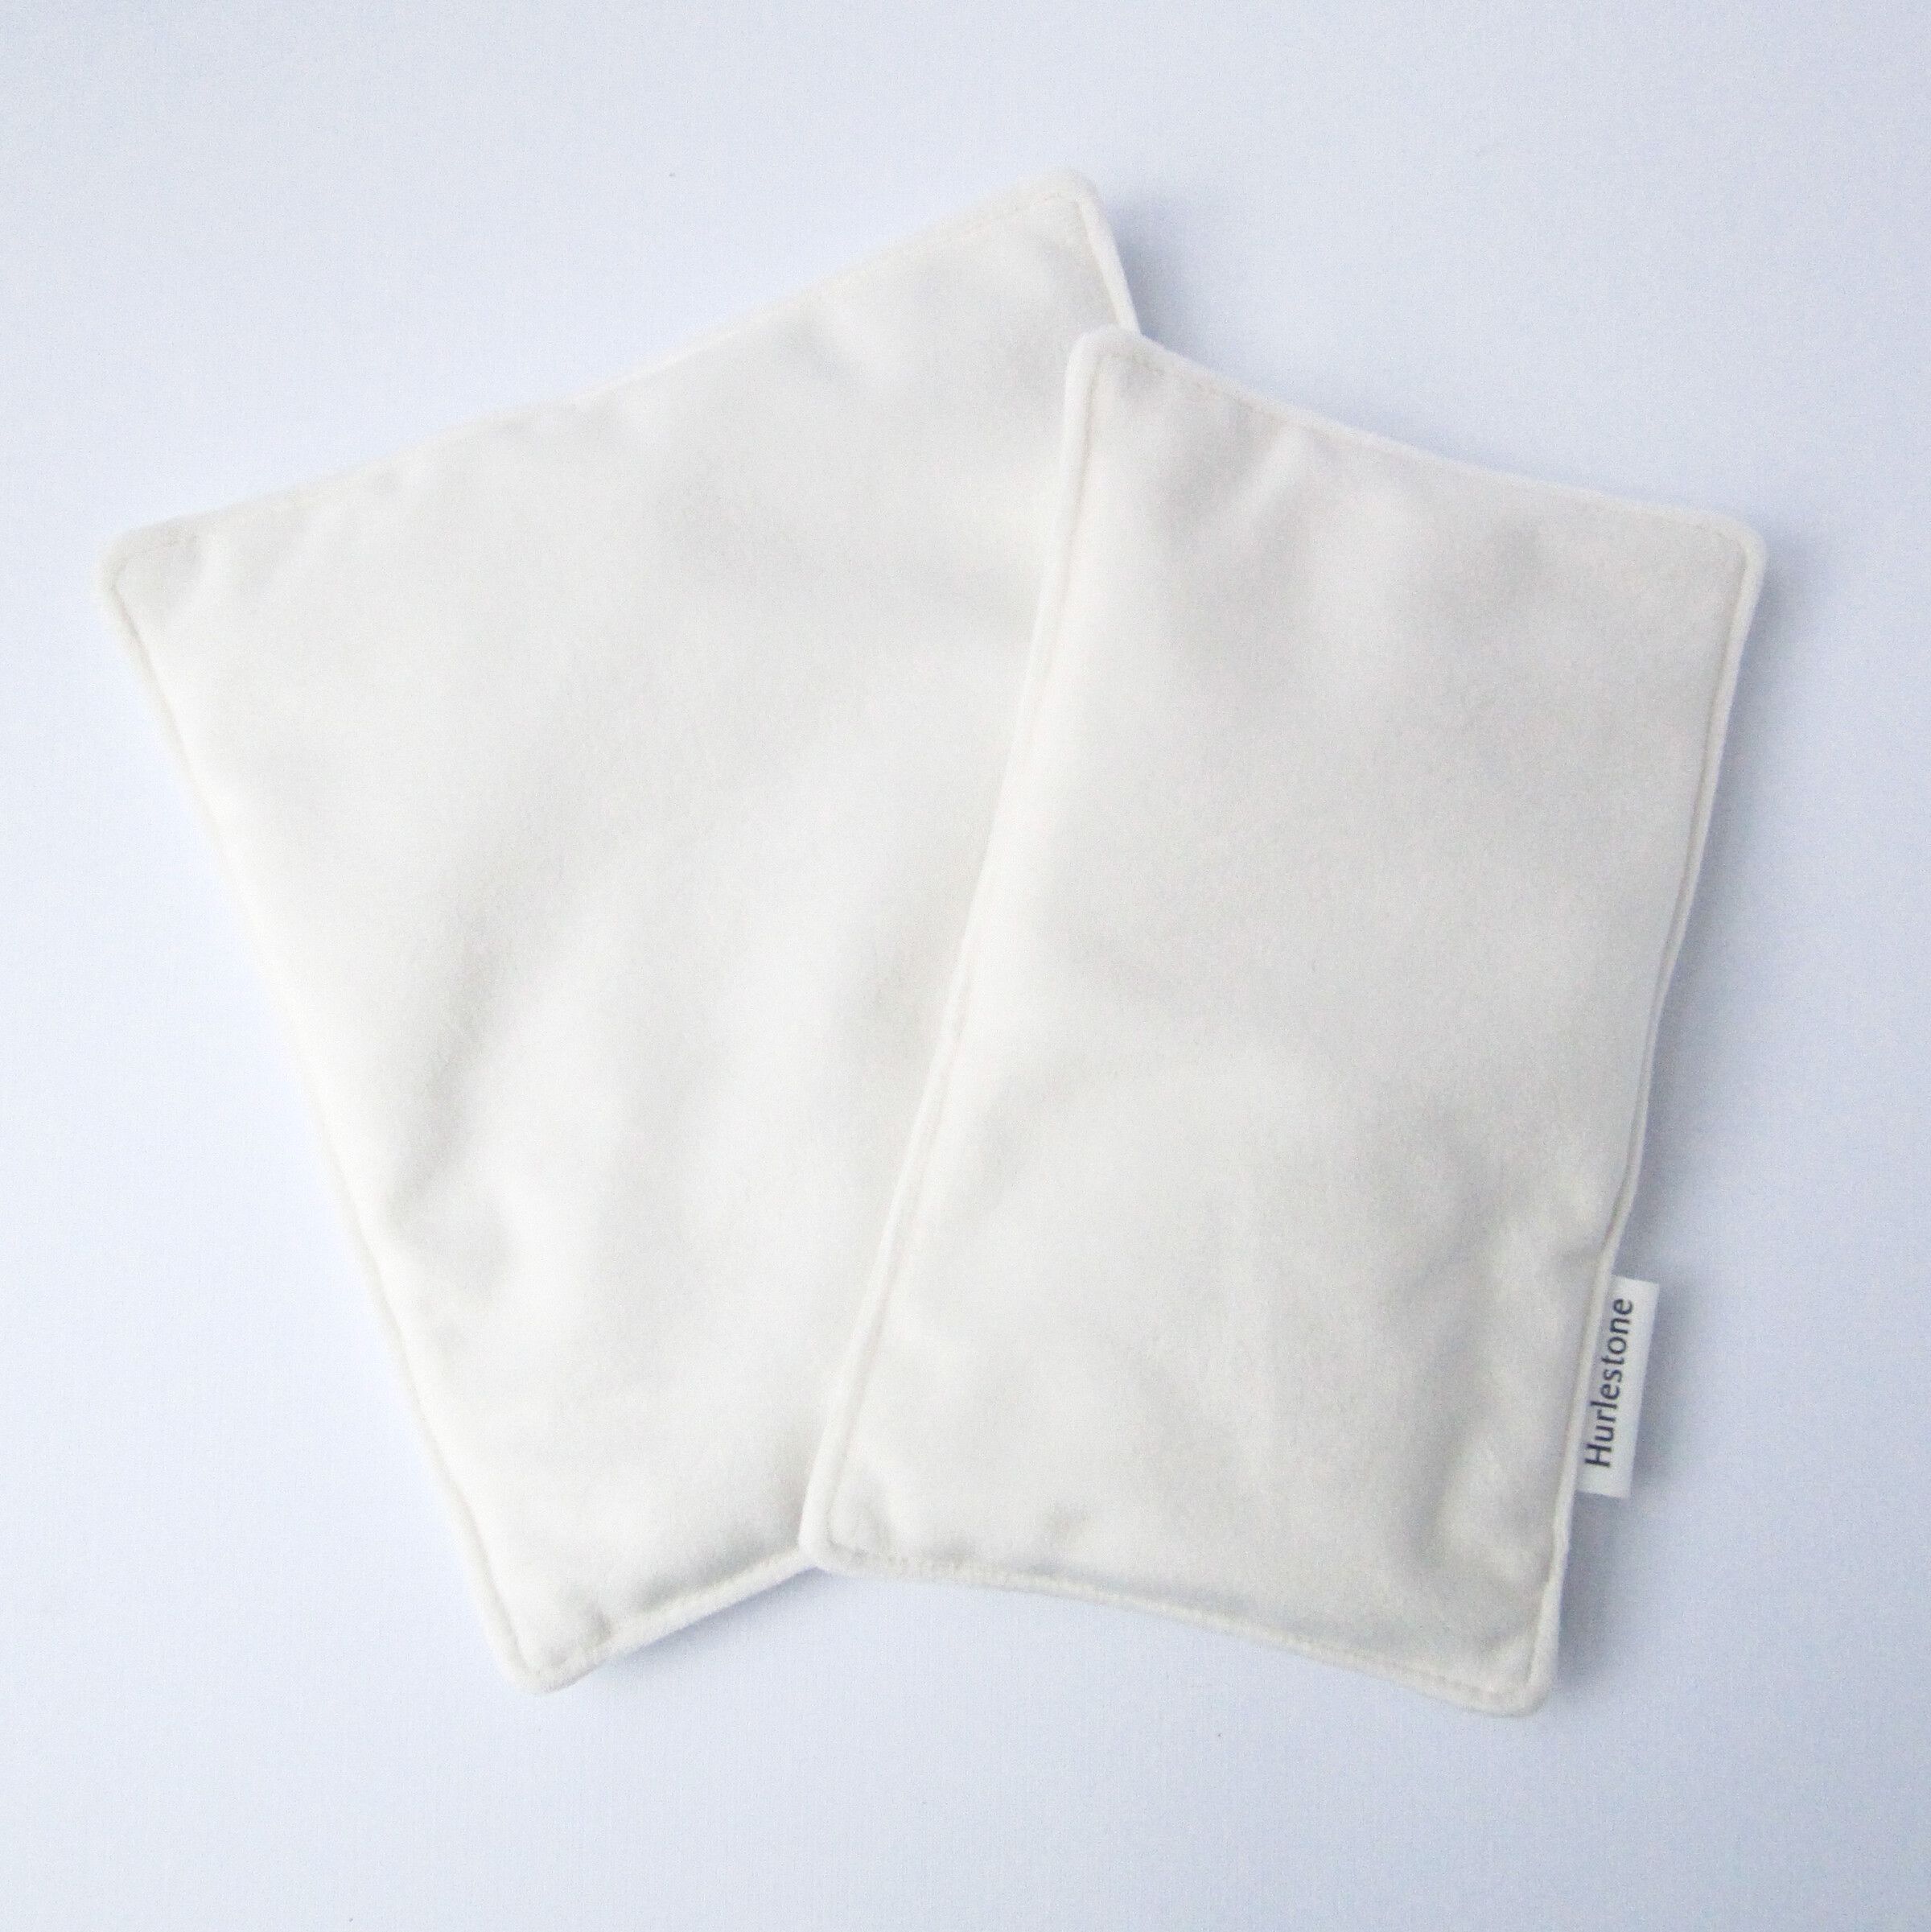 Cream Pen Pillow - Small/Large from NZ$16.00